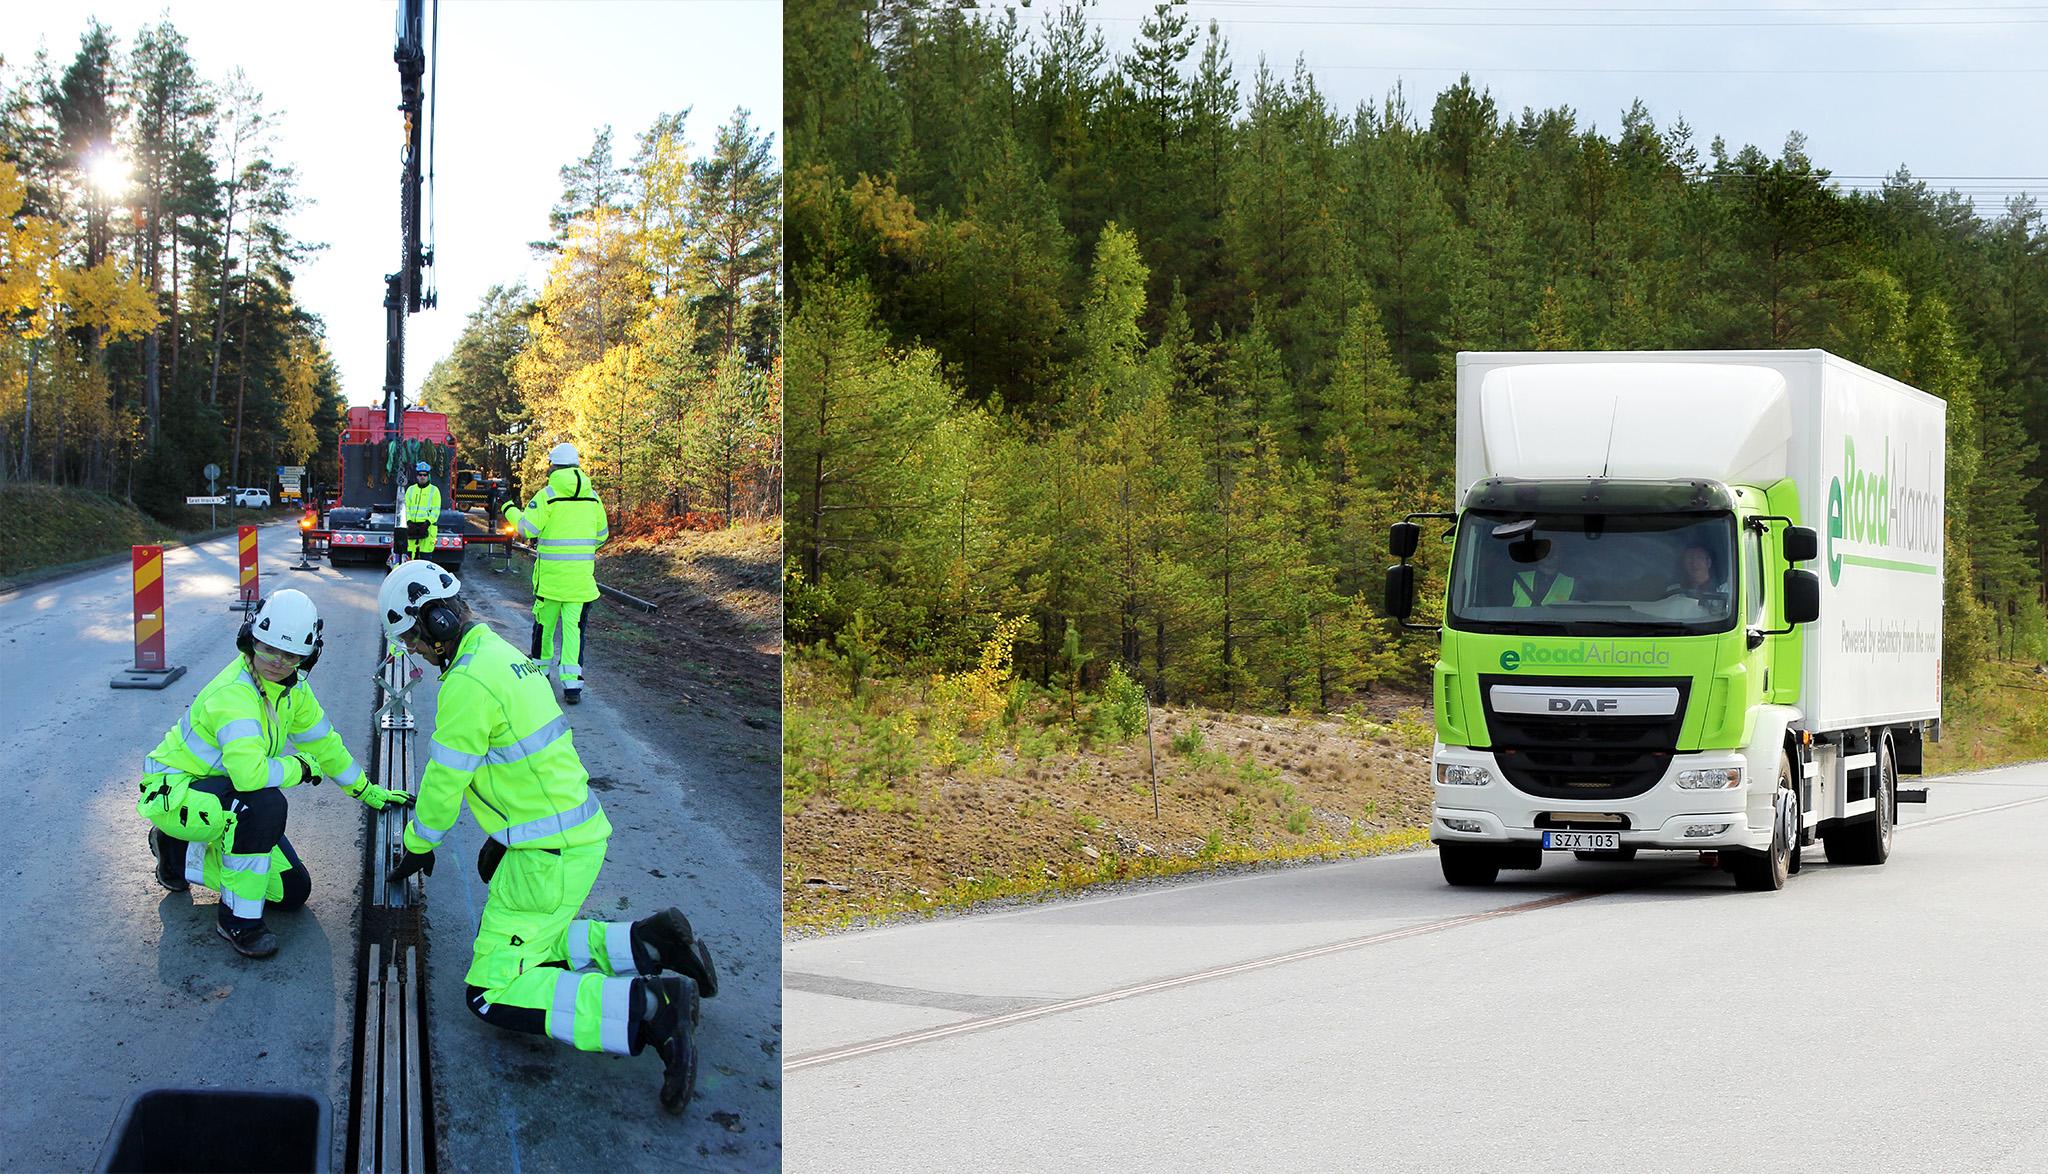 Left: workers installing a rail in a road. Right: An electric lorry driving on the rail.